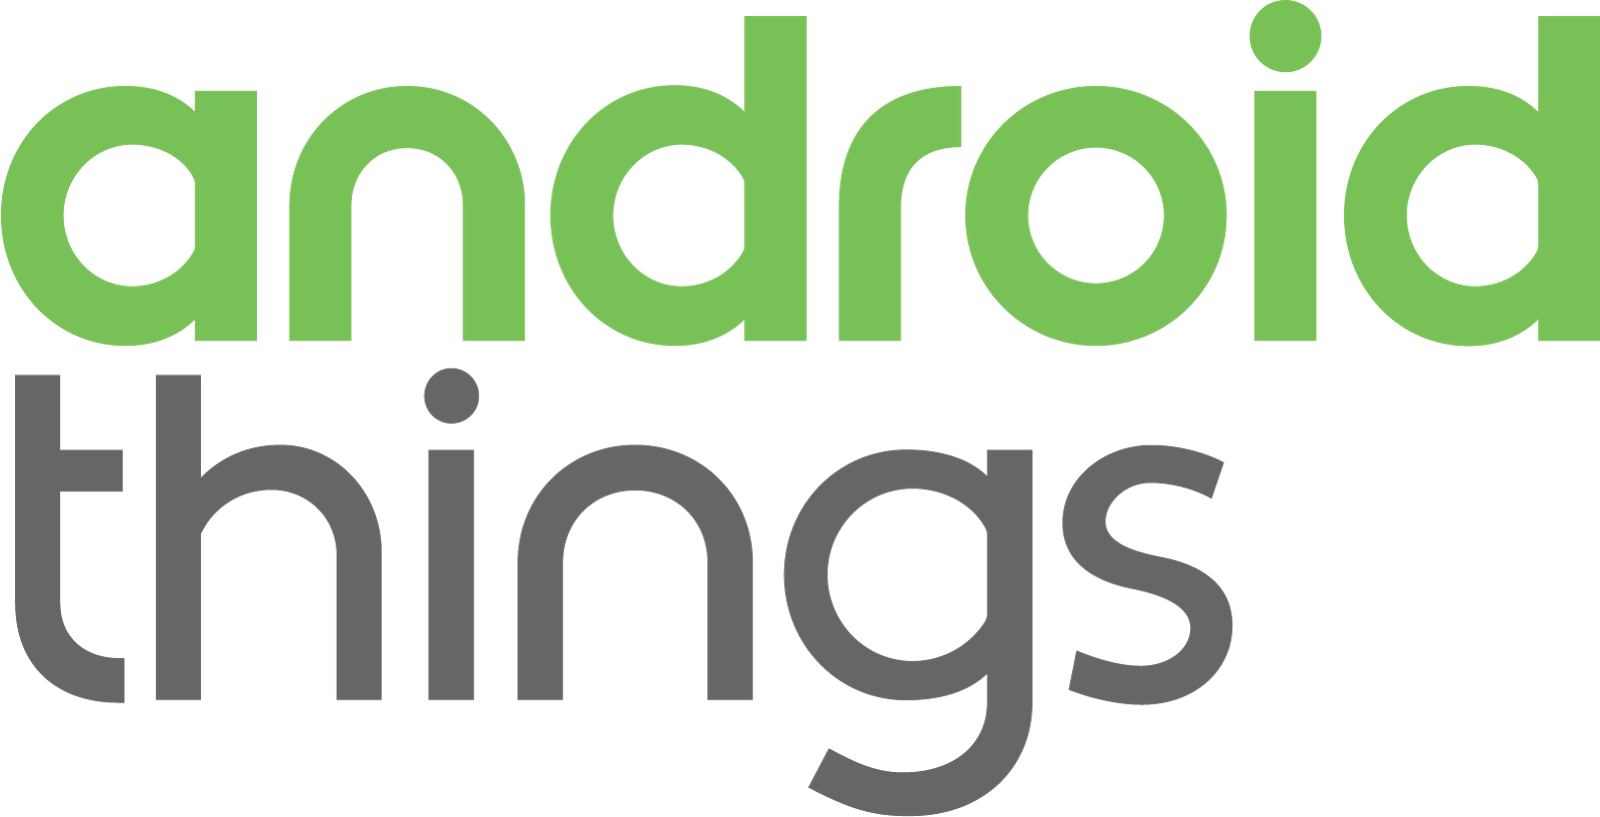 Google releases Android Things Developer Preview 5 1